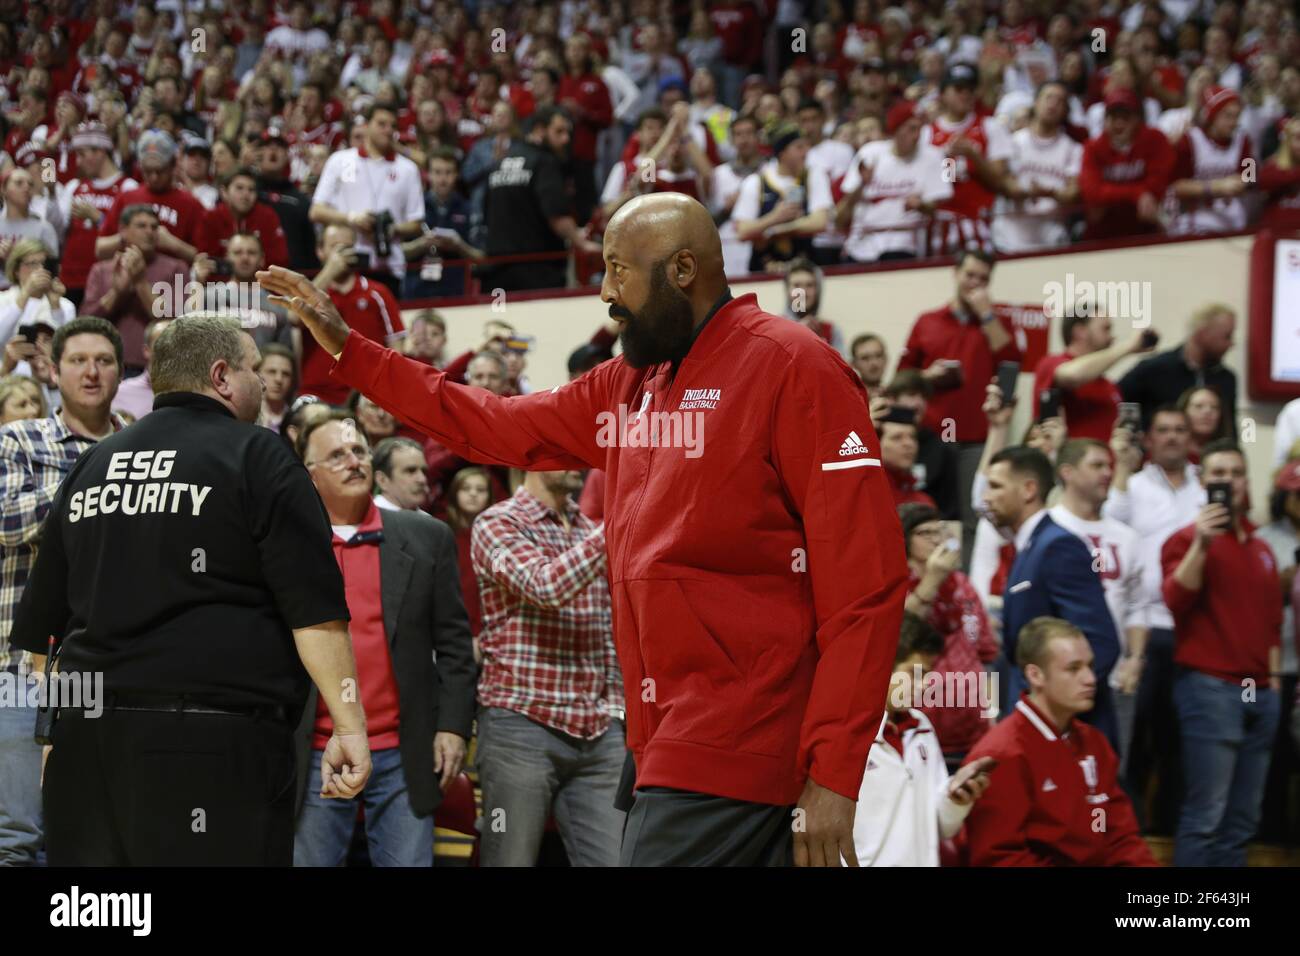 Former IU basketball player Mike Woodson (42) walks on the court of Assembly Hall as NCAA basketball coach. Bob Knight, who took the Indiana Hoosiers to three NCAA national titles, returns to Assembly Hall, Saturday, February 8, 2020 in Bloomington. Mike Woodson was named as the new IU basketball coach this Monday Mar 29th. Stock Photo